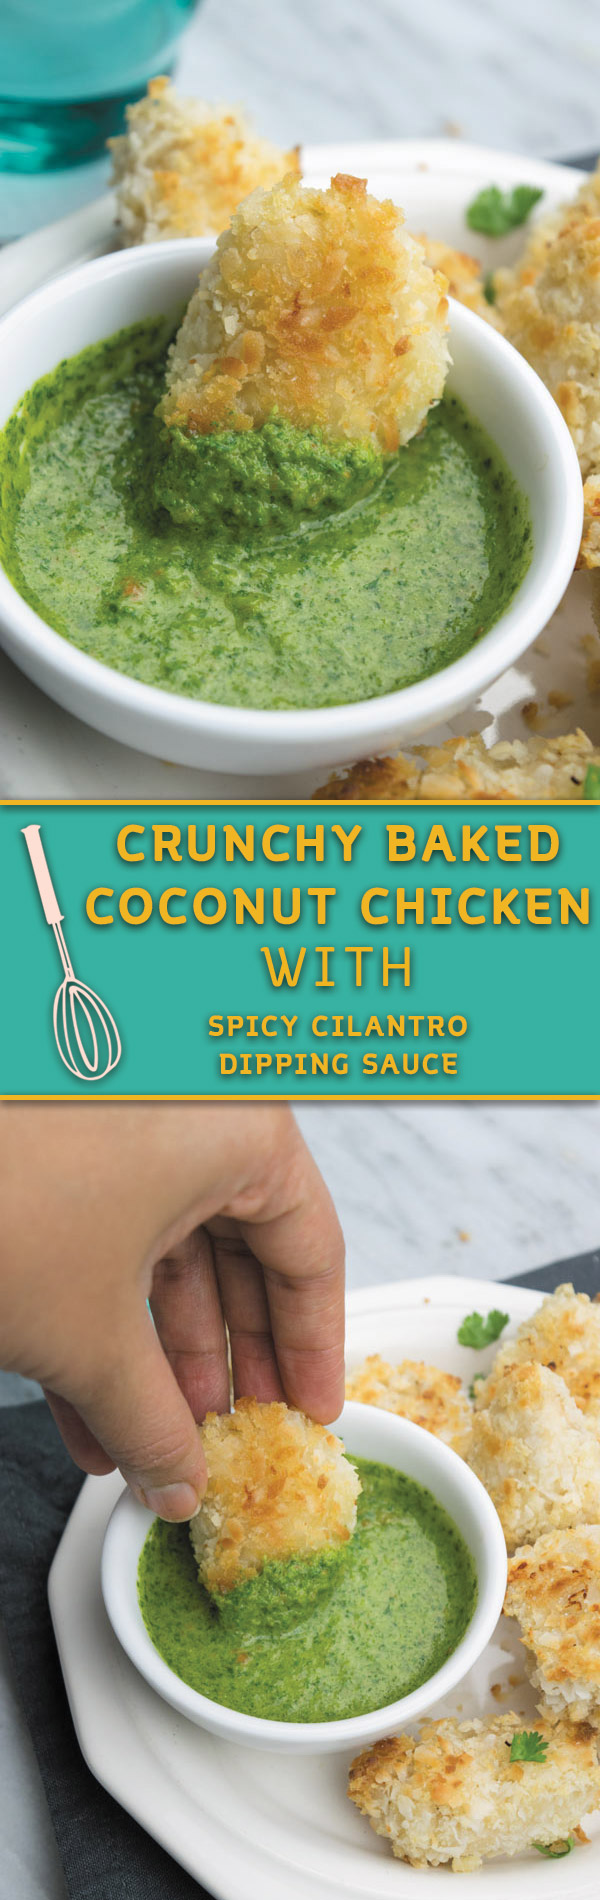 Crunchy Baked Coconut Chicken Bites - Crunchy baked coconut chicken, slightly on the sweeter side served with a spicy cilantro dipping sauce. So good!